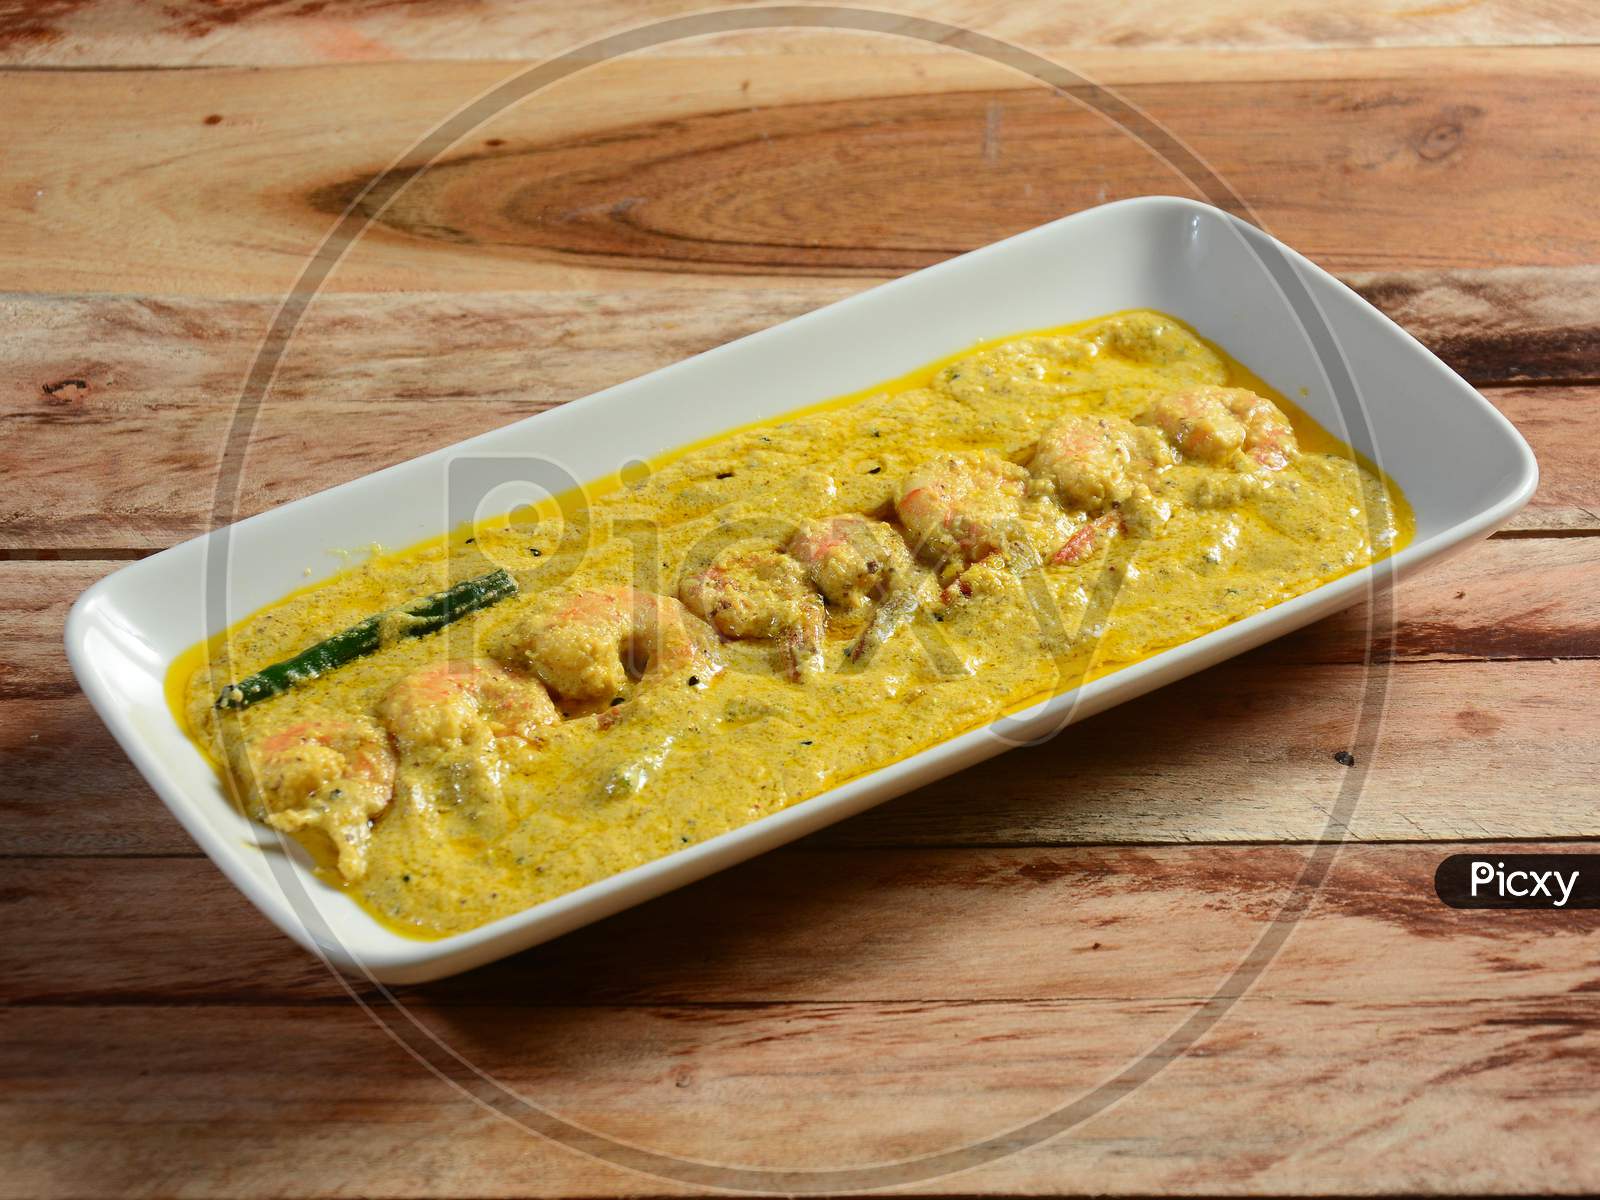 Bengali Dish Or Food - Delicious Authentic Bengali Prawn Malai Curry Also Known As Chingri Malai Curry Served On A Ceramic White Bowl, Over A Rustic Wooden Background,Selective Focus